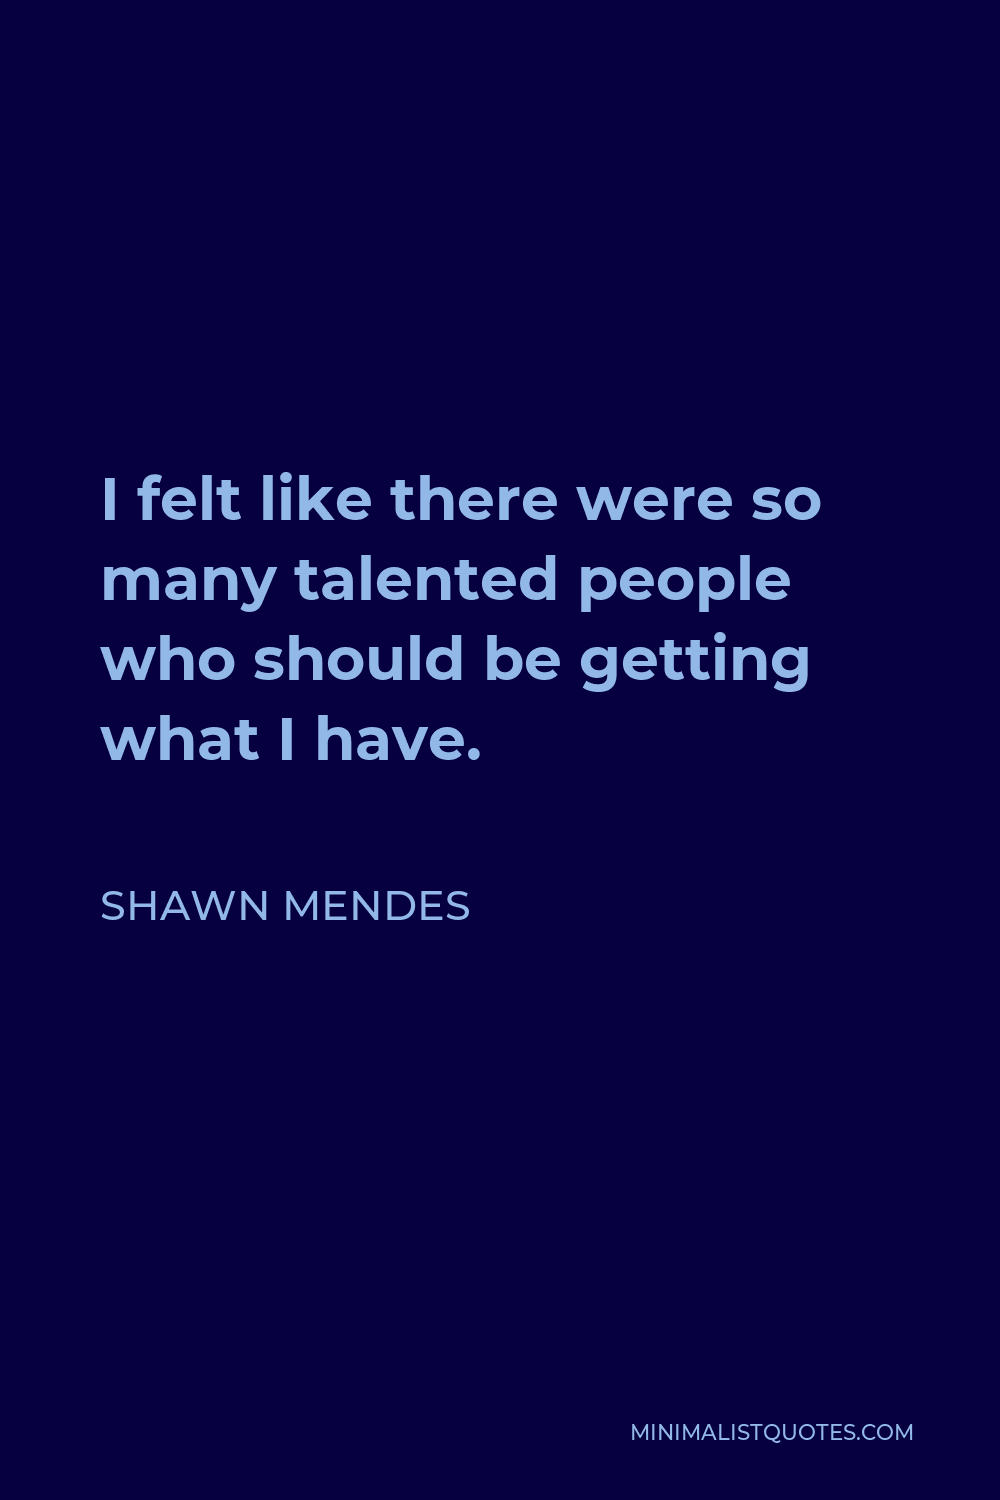 Shawn Mendes Quote - I felt like there were so many talented people who should be getting what I have.